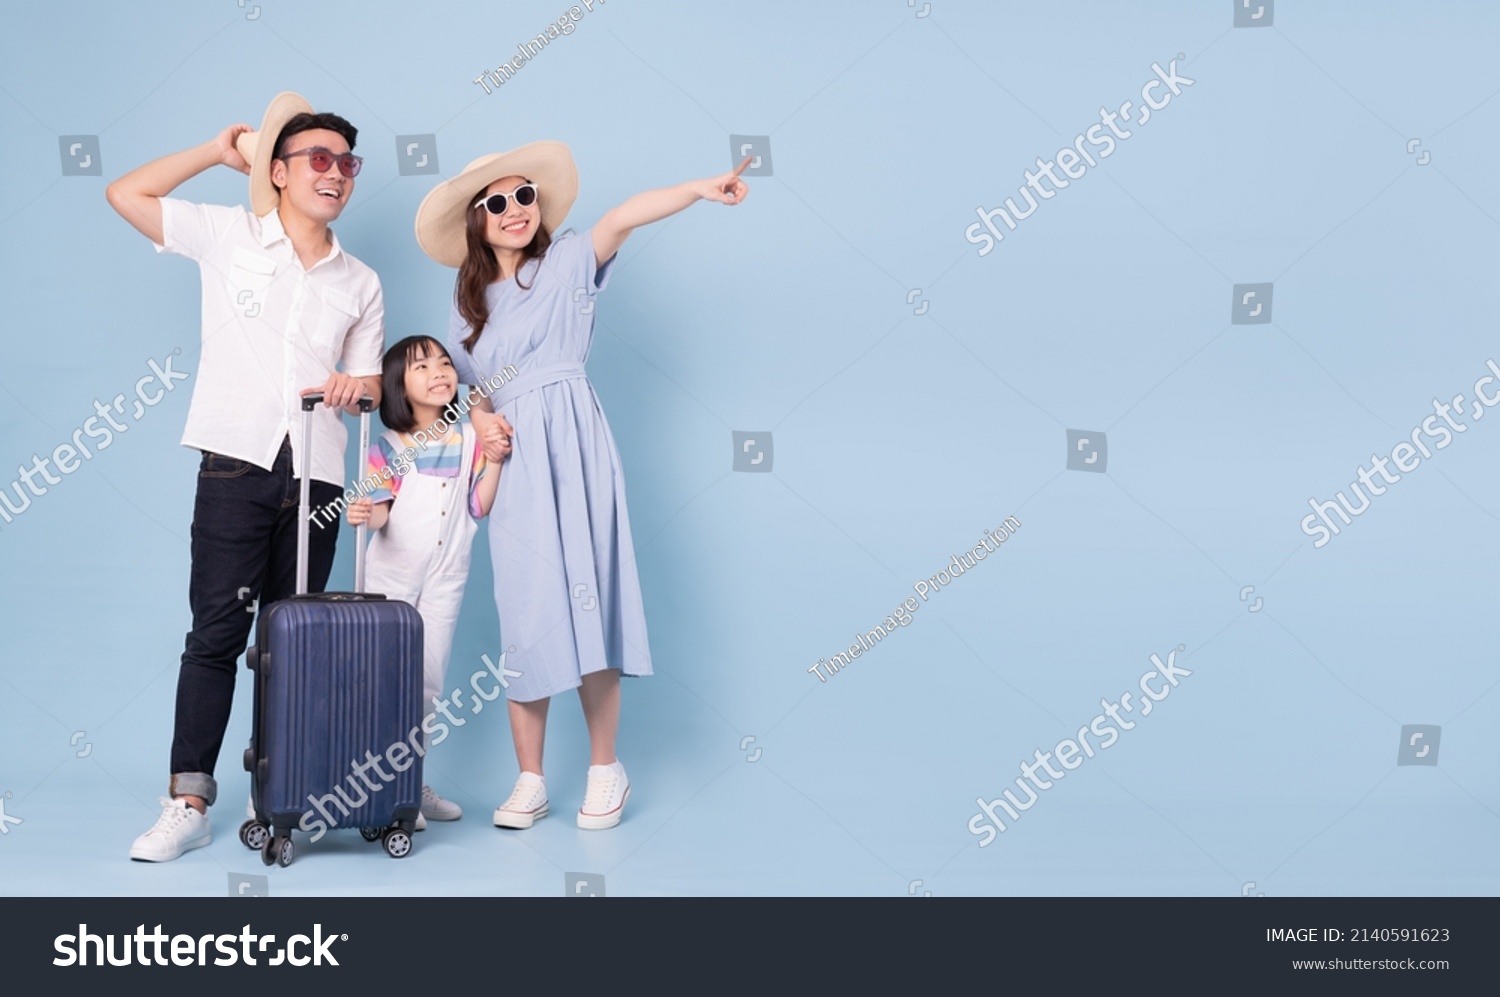 Image of young Asian family travel concept background #2140591623